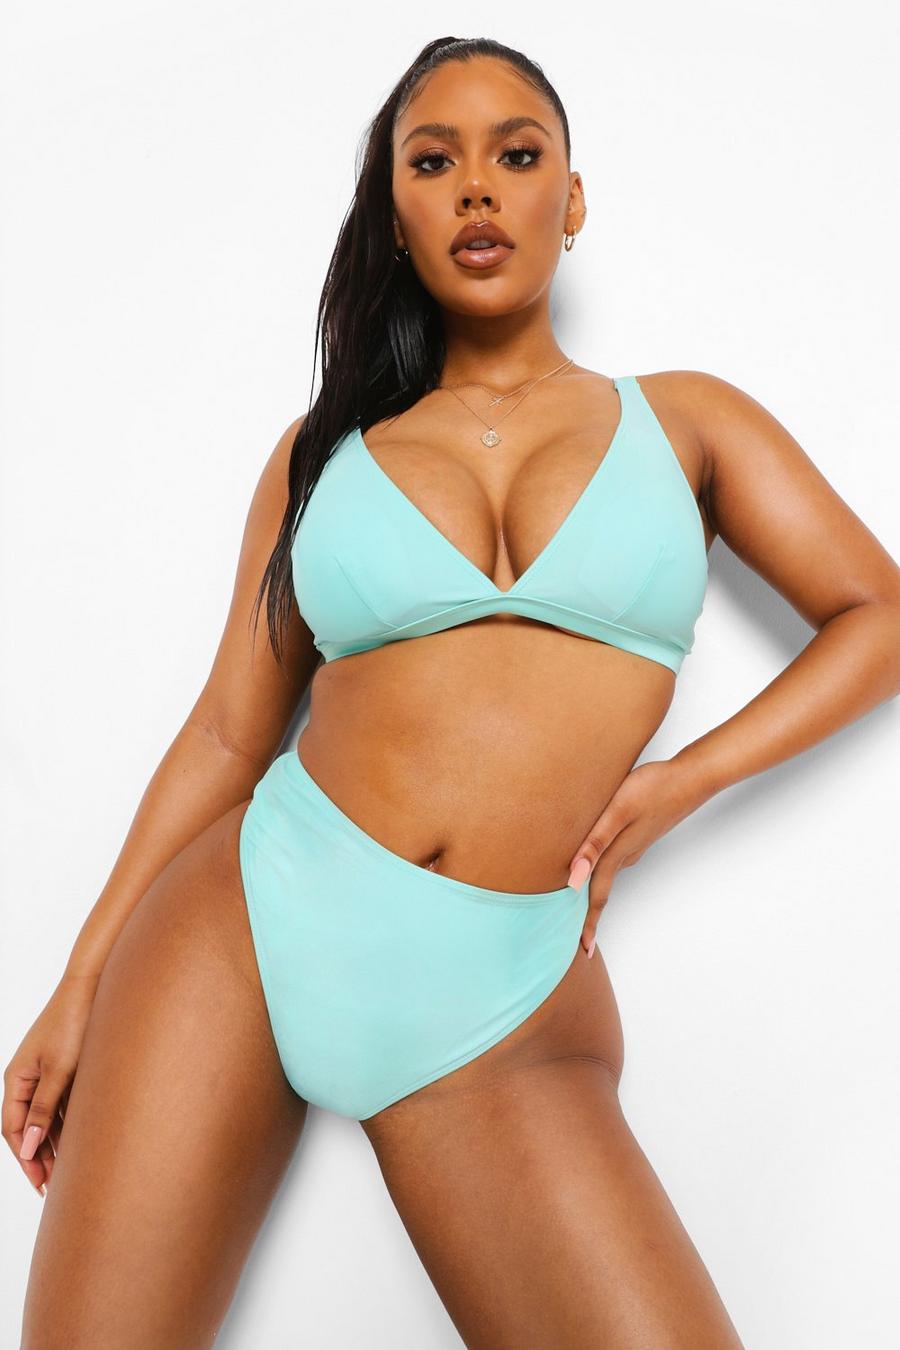 Woman let down by Boohoo 'fuller bust' bikini that doesn't fit her